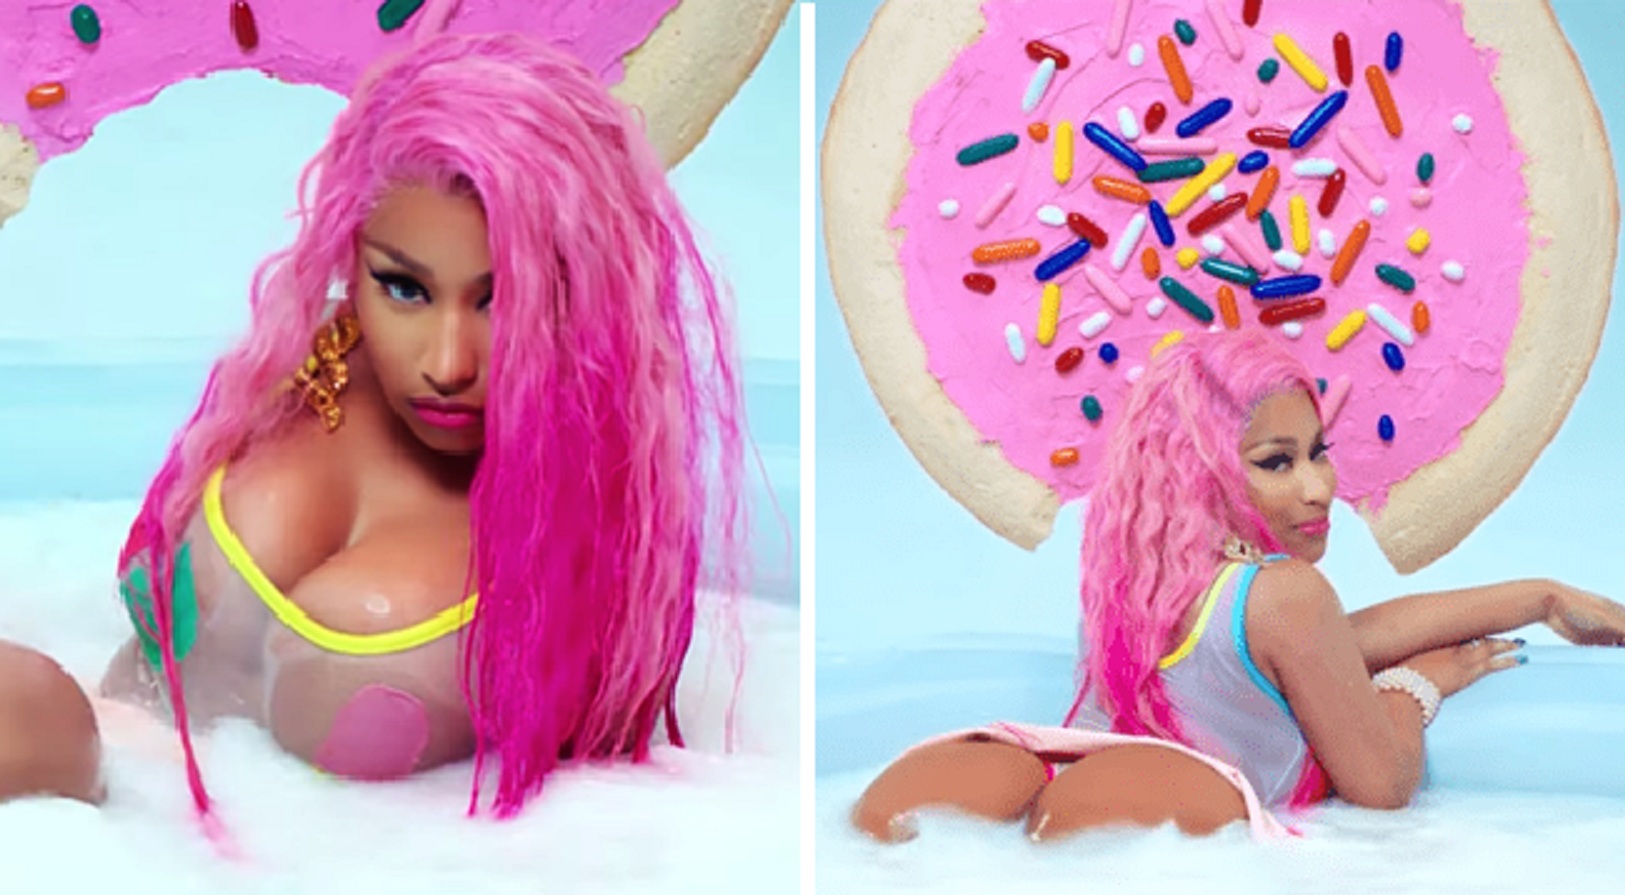 Watch: Nicki Minaj’s Sexually-Charged New Video For 'Good Form'. 